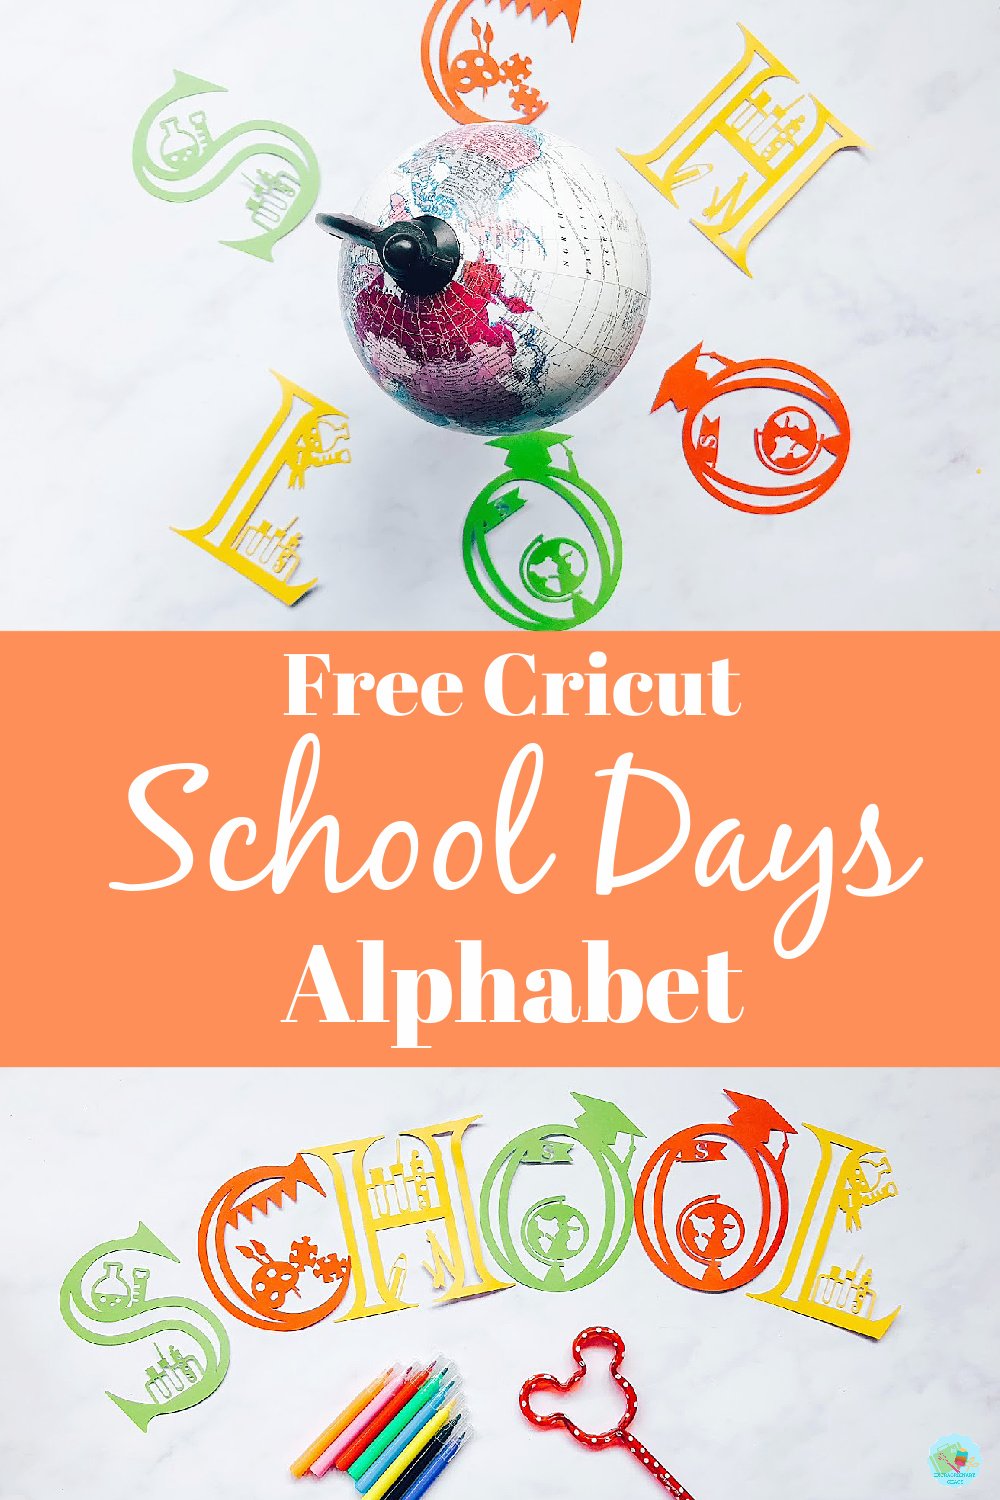 Free Cricut Back To School Letters for craft projects and school days themed decor and banners